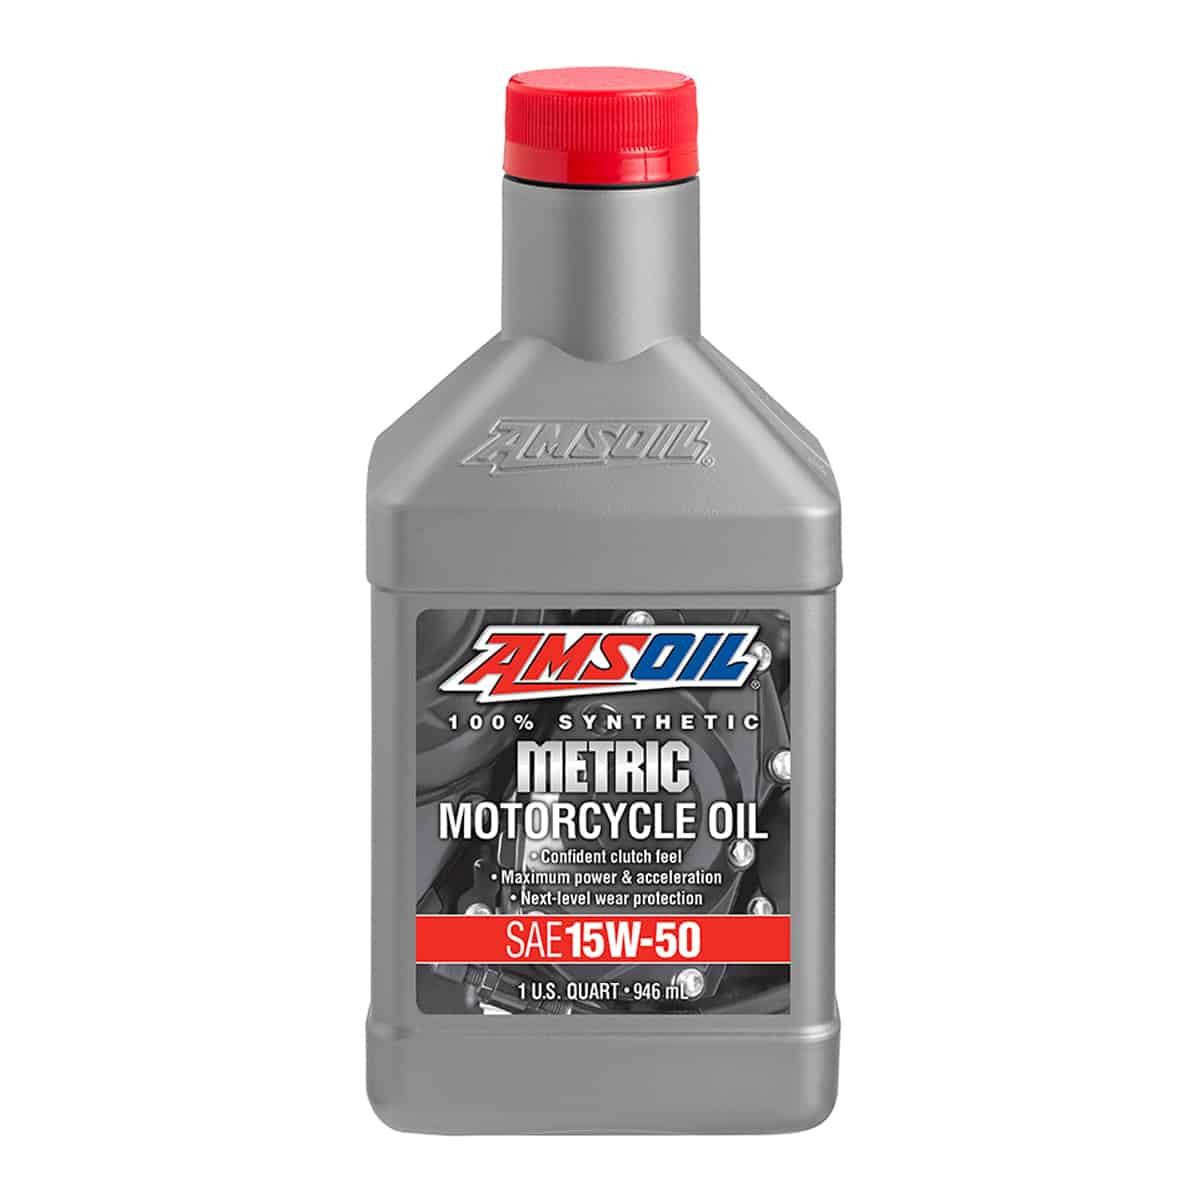 Synthetic Metric Motorcycle Oil